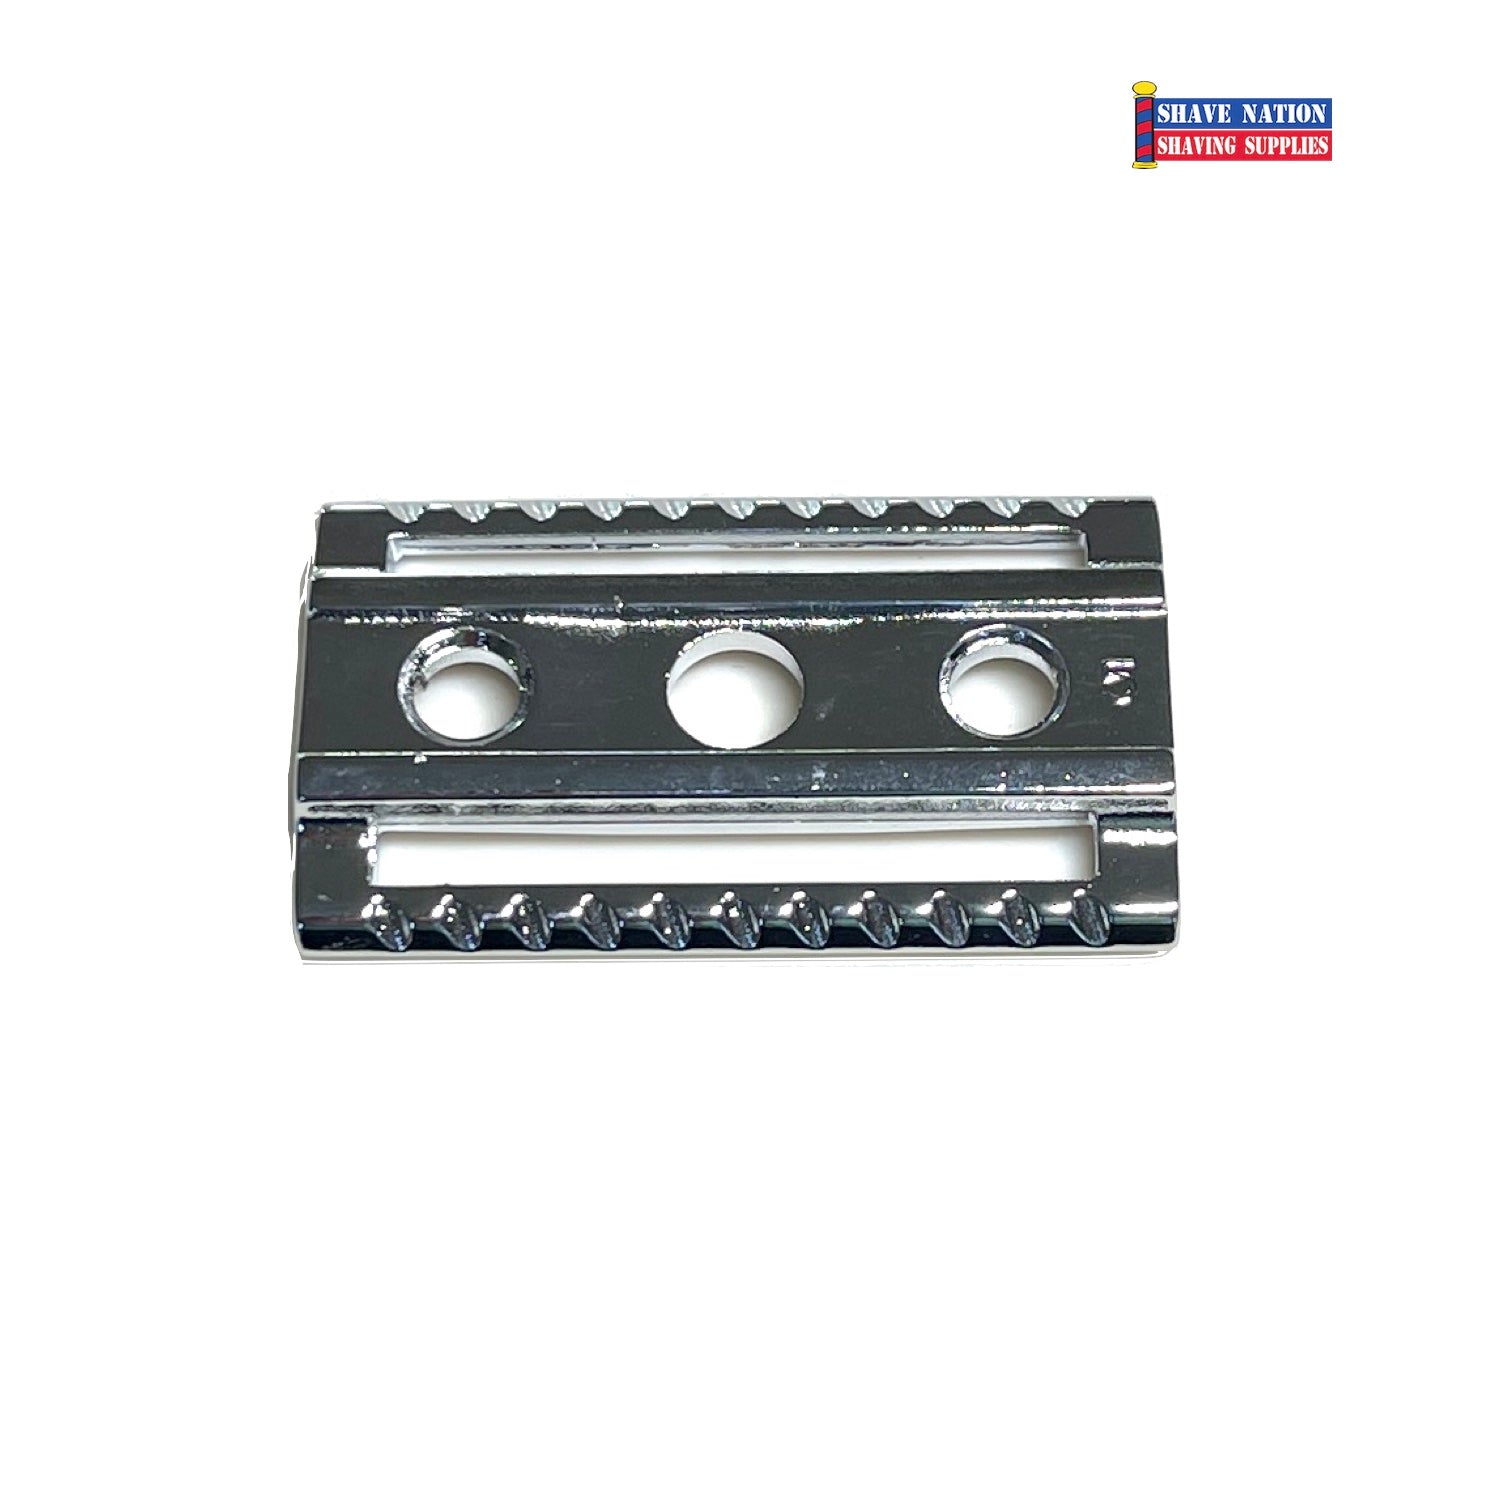 Merkur Parts: Closed Comb Safety Bar for: 33-23-20-30-40-42-43-44-47-933